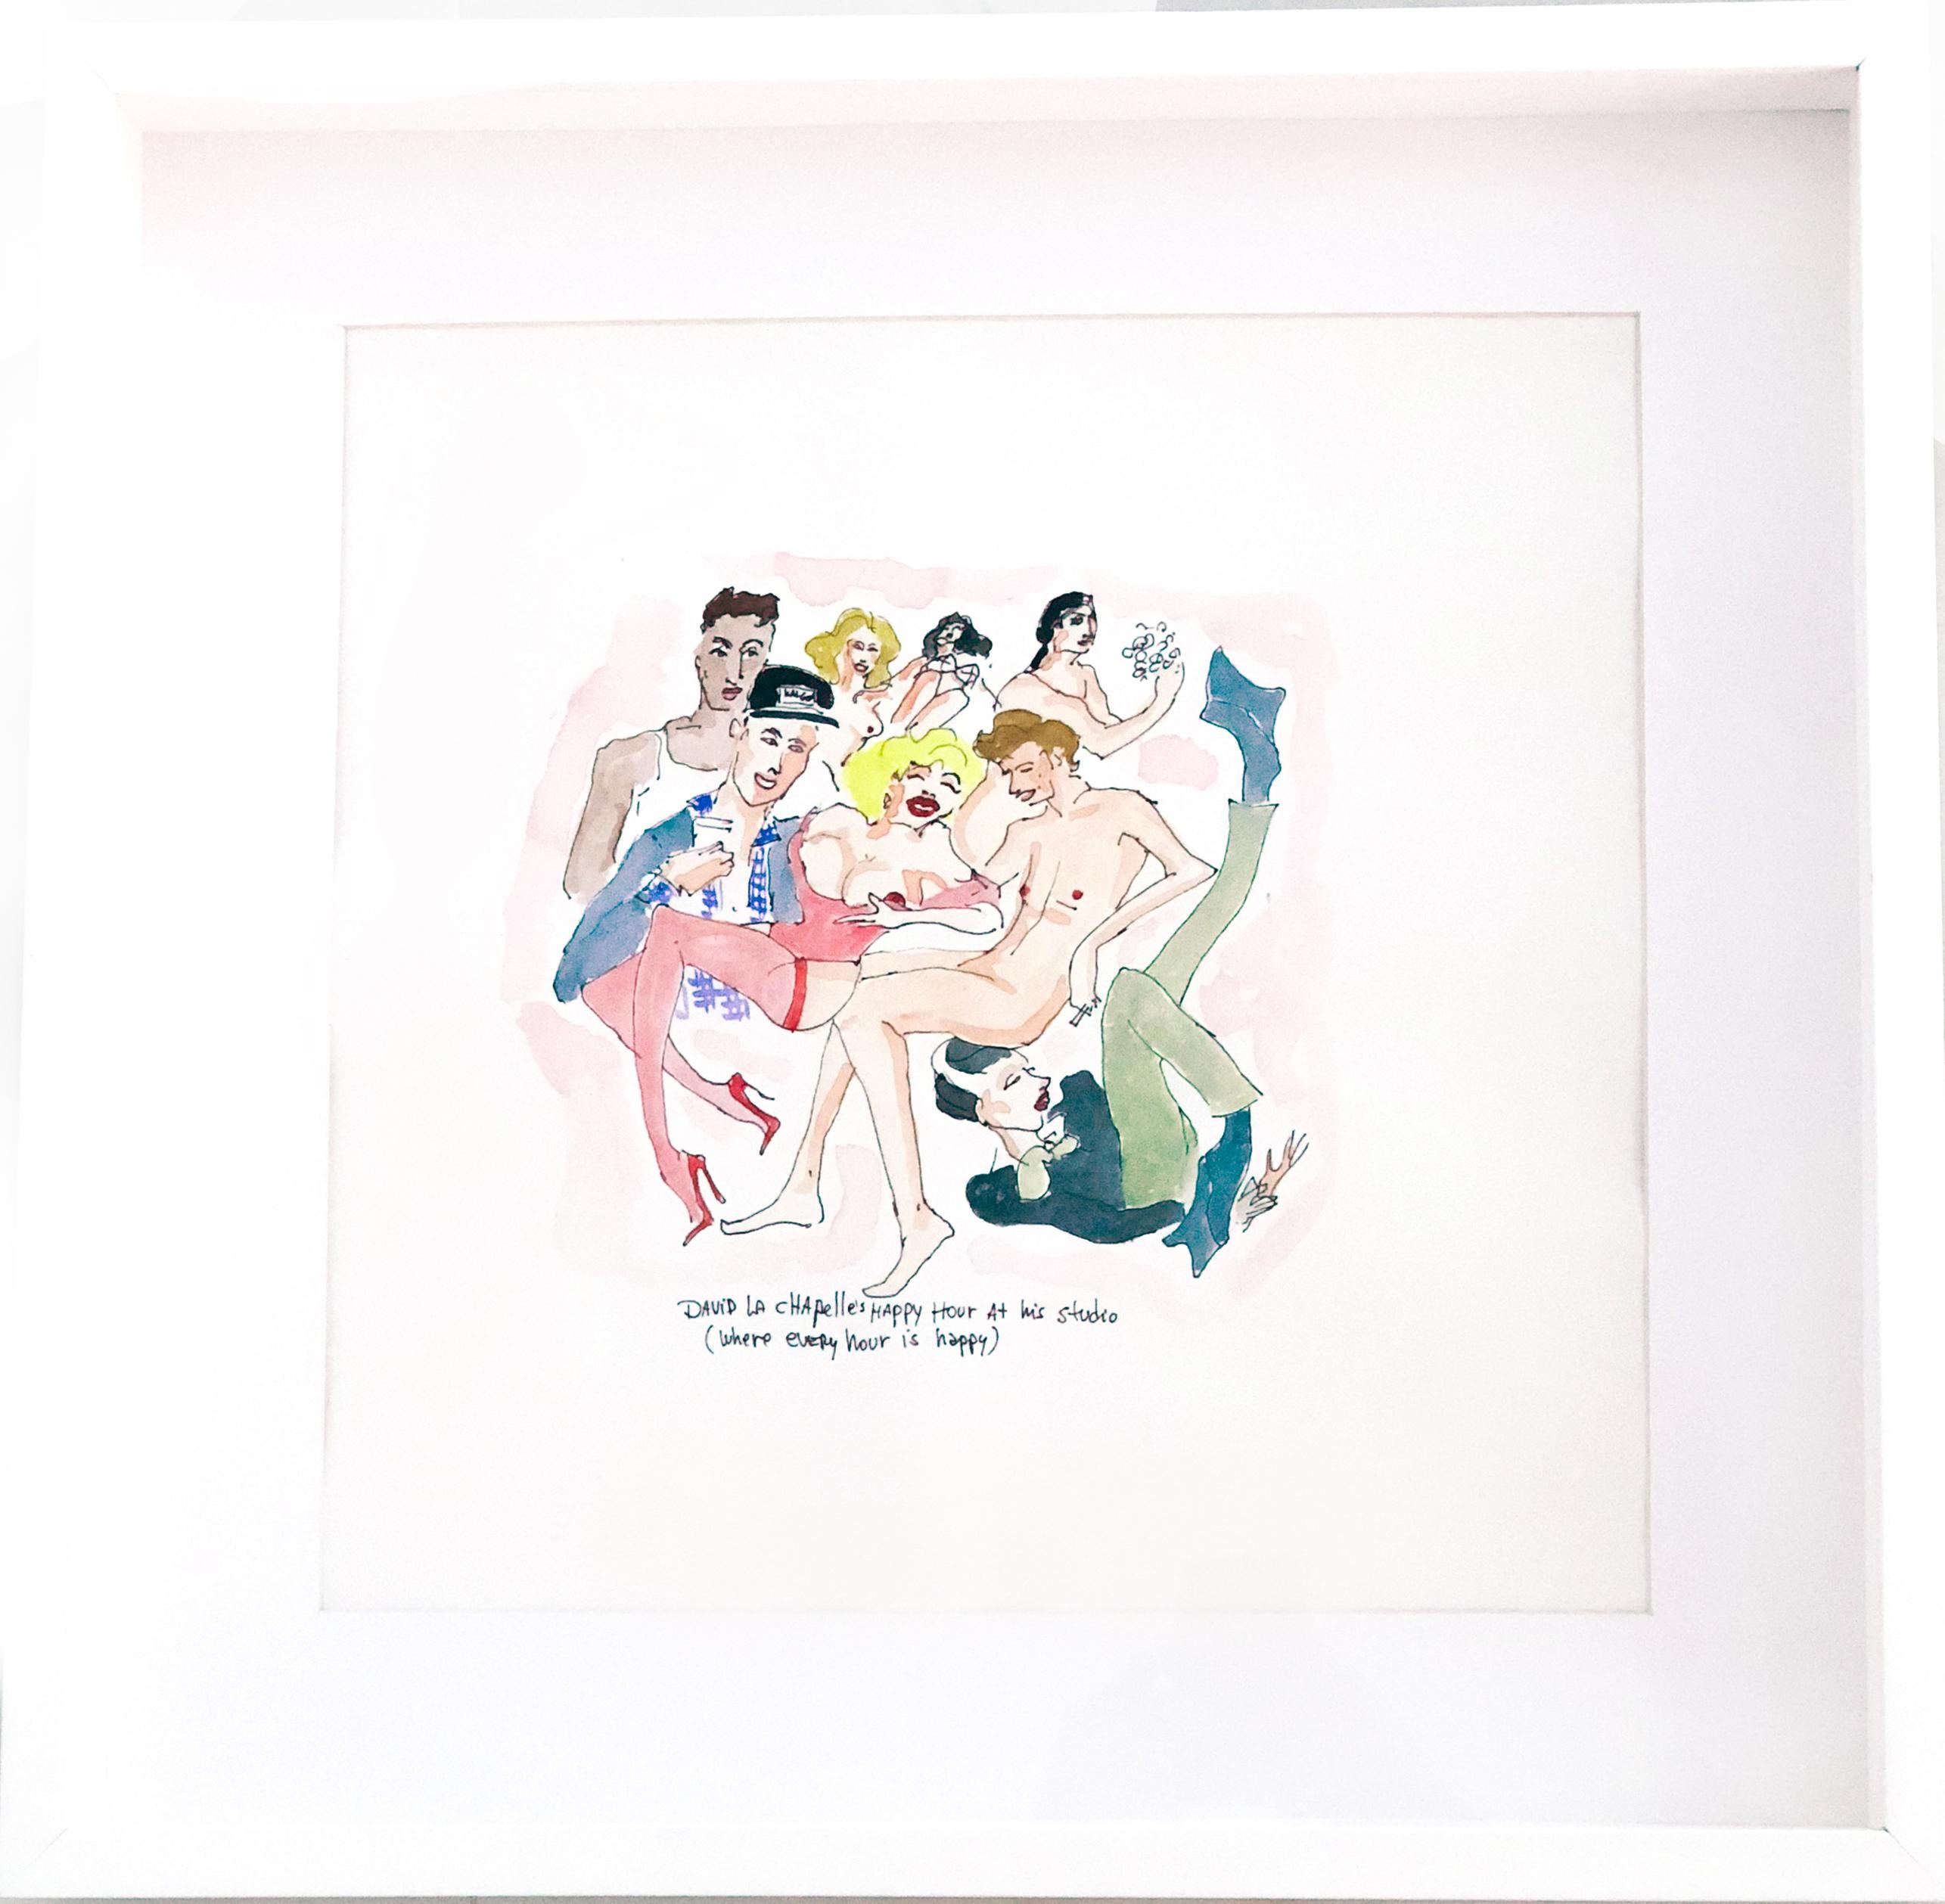 Manuel Santelices Figurative Art - Happy hour at David LaChapelle - One of a kind watercolor, Framed